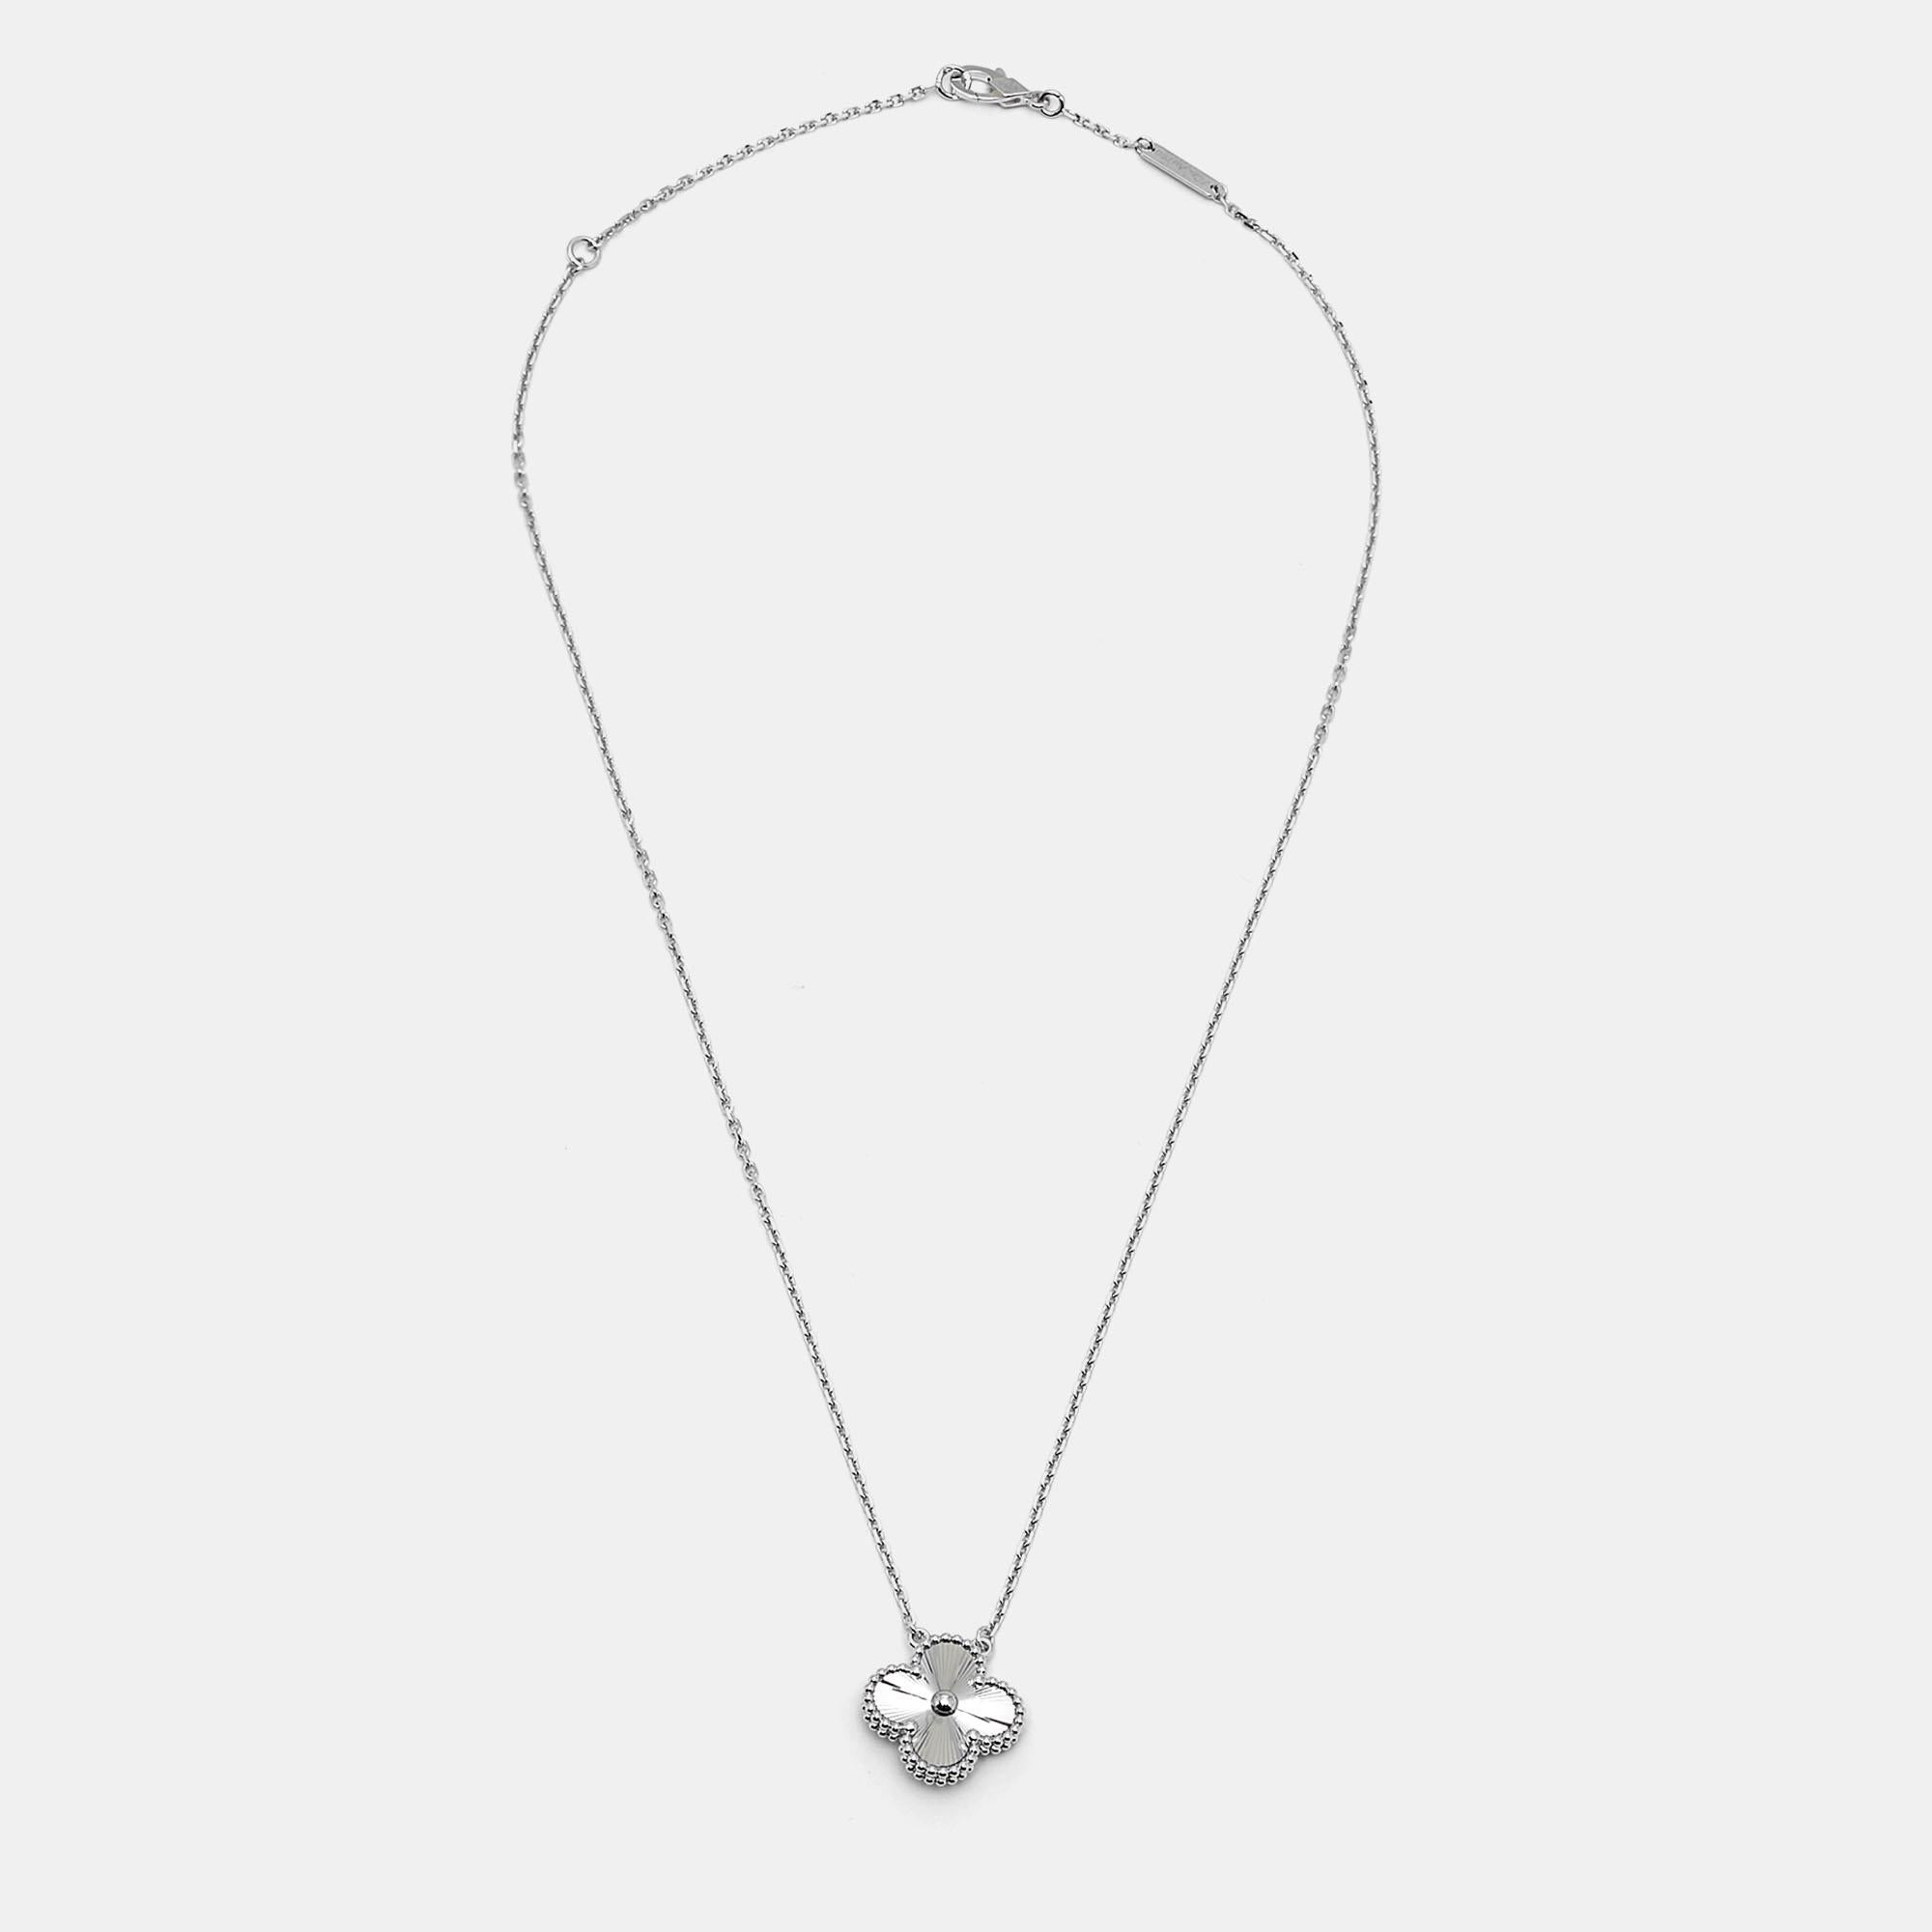 Van Cleef & Arpels’ Alhambra jewel was first created in 1968, and the Vintage Alhambra creations remain faithful to its timeless elegance. The iconic clover motif is a potent symbol of luck and here, it comes in 18k white gold, adorned with a